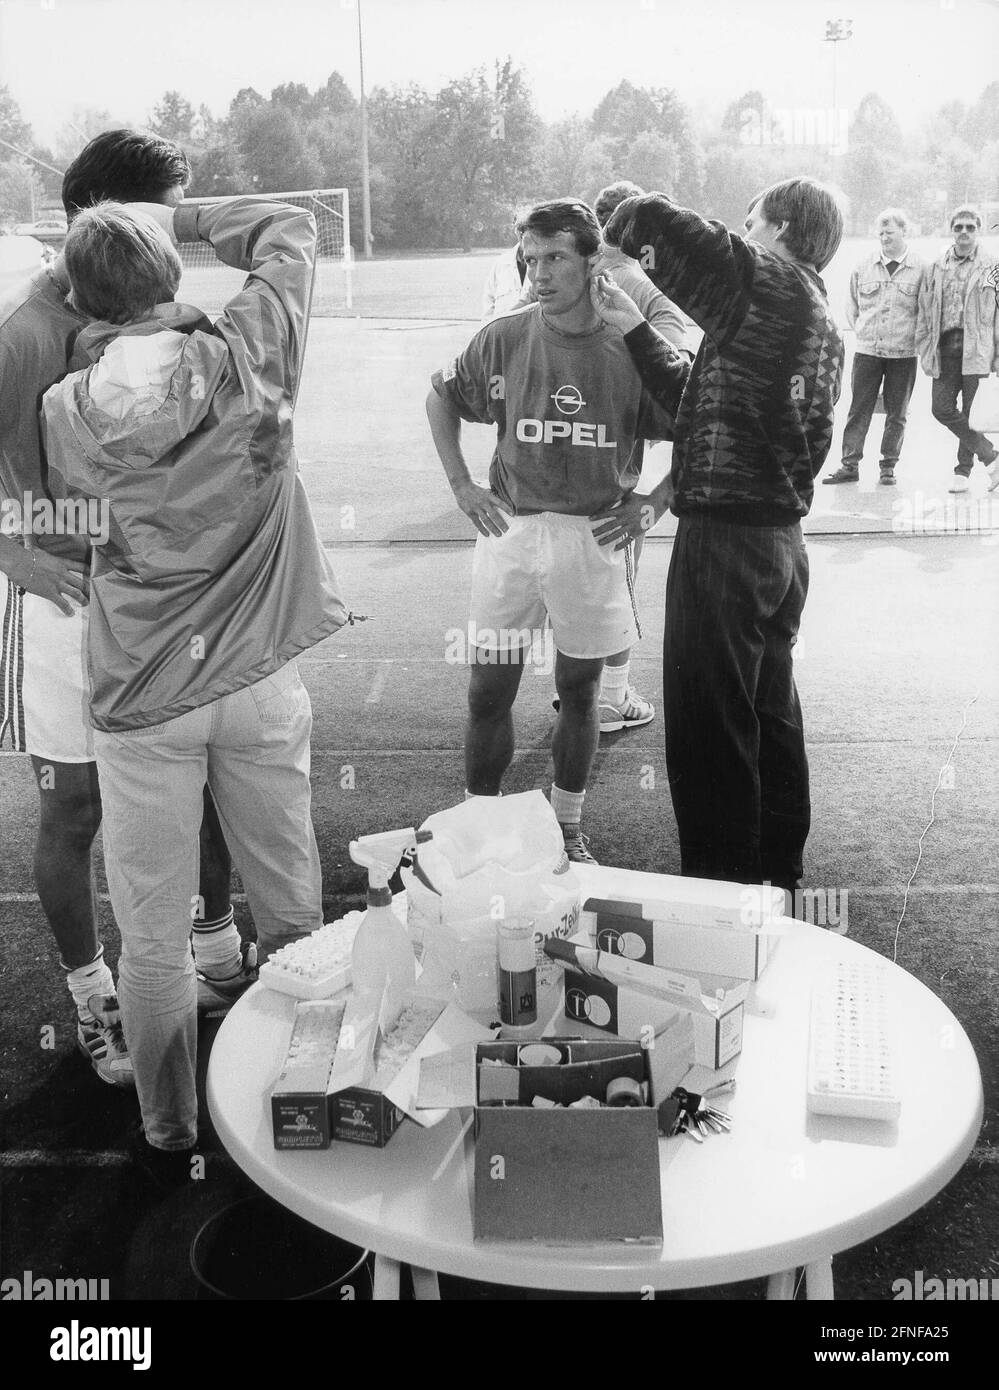 Recording date: 08.10.1992 The FC Bayern München player Lothar Matthäus is subjected to a lactate test by Stefan Mücke, a scientific employee of the Paderborn Sports Medicine Institute. [automated translation] Stock Photo